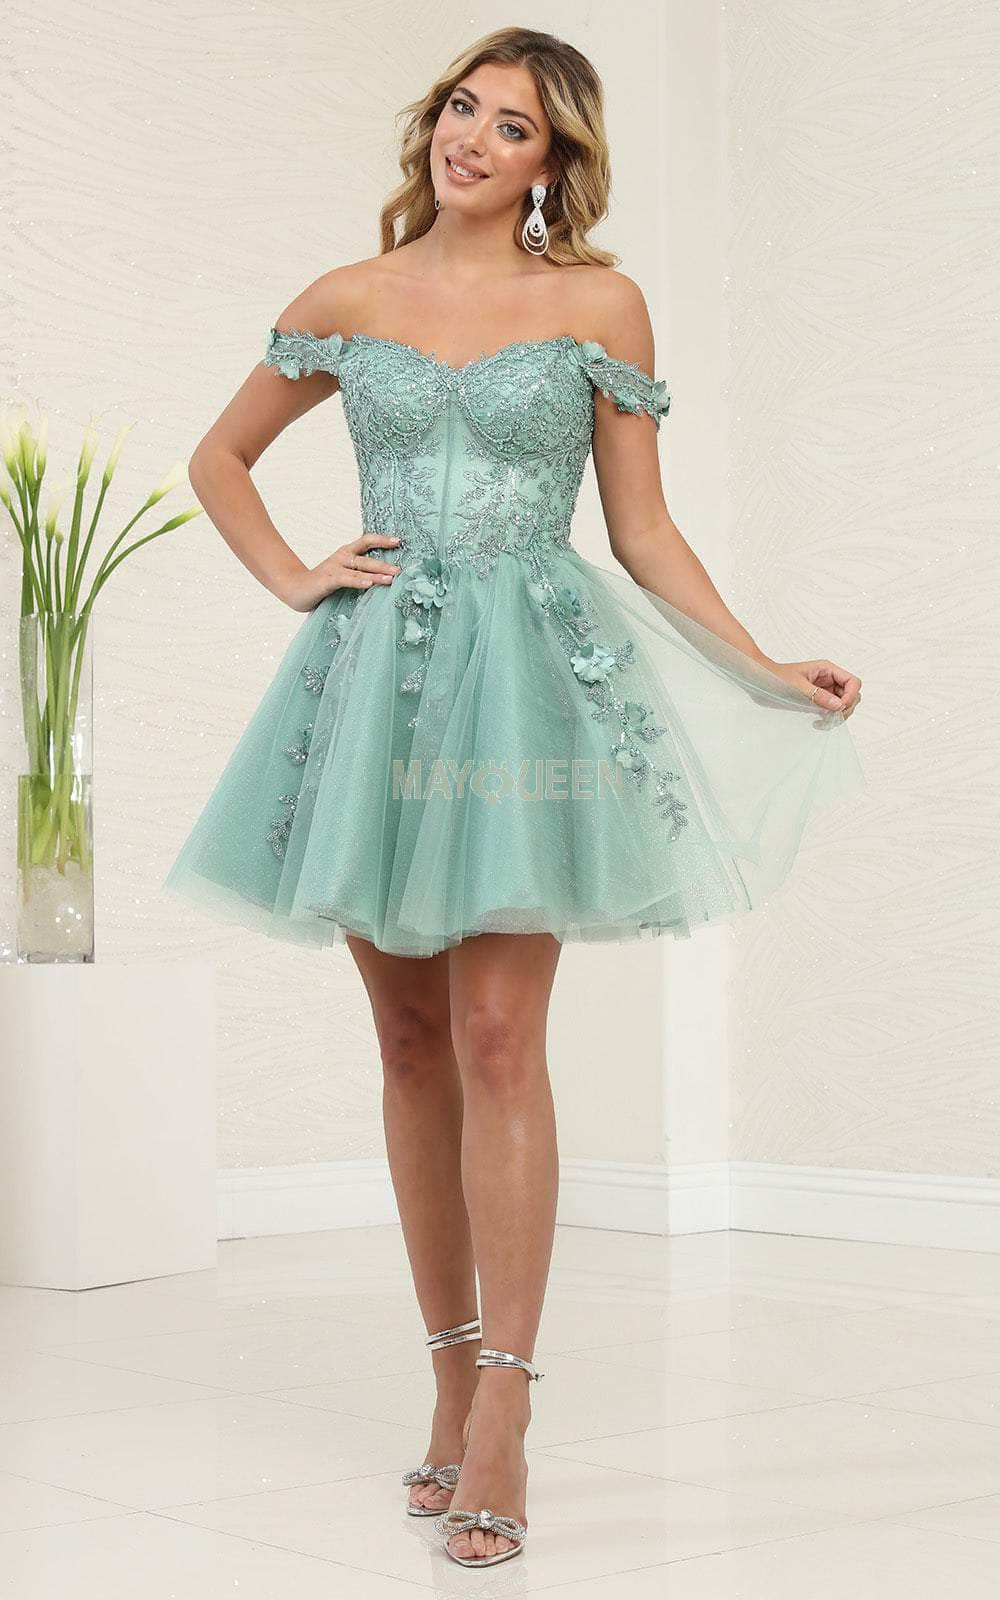 May Queen MQ2081 - A-Line Homecoming Dress Special Occasion Dresses